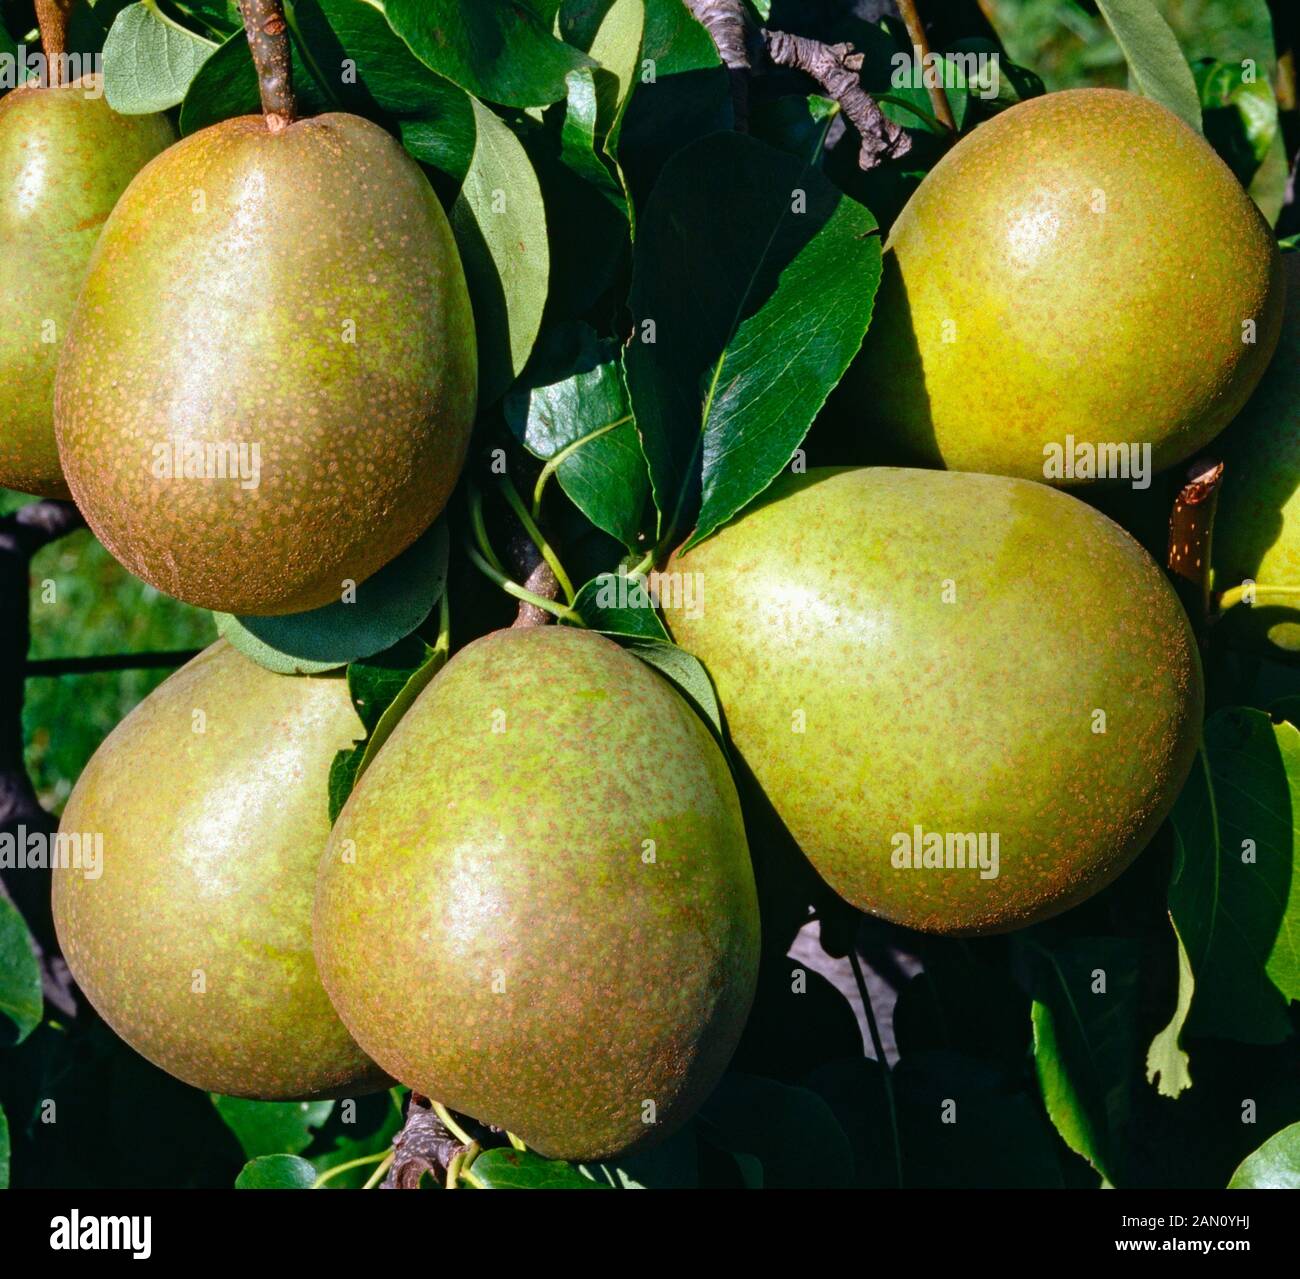 PYRUS COMMUNIS 'BEURRE HARDY'  (PEAR 'BEURRE HARDY') Stock Photo